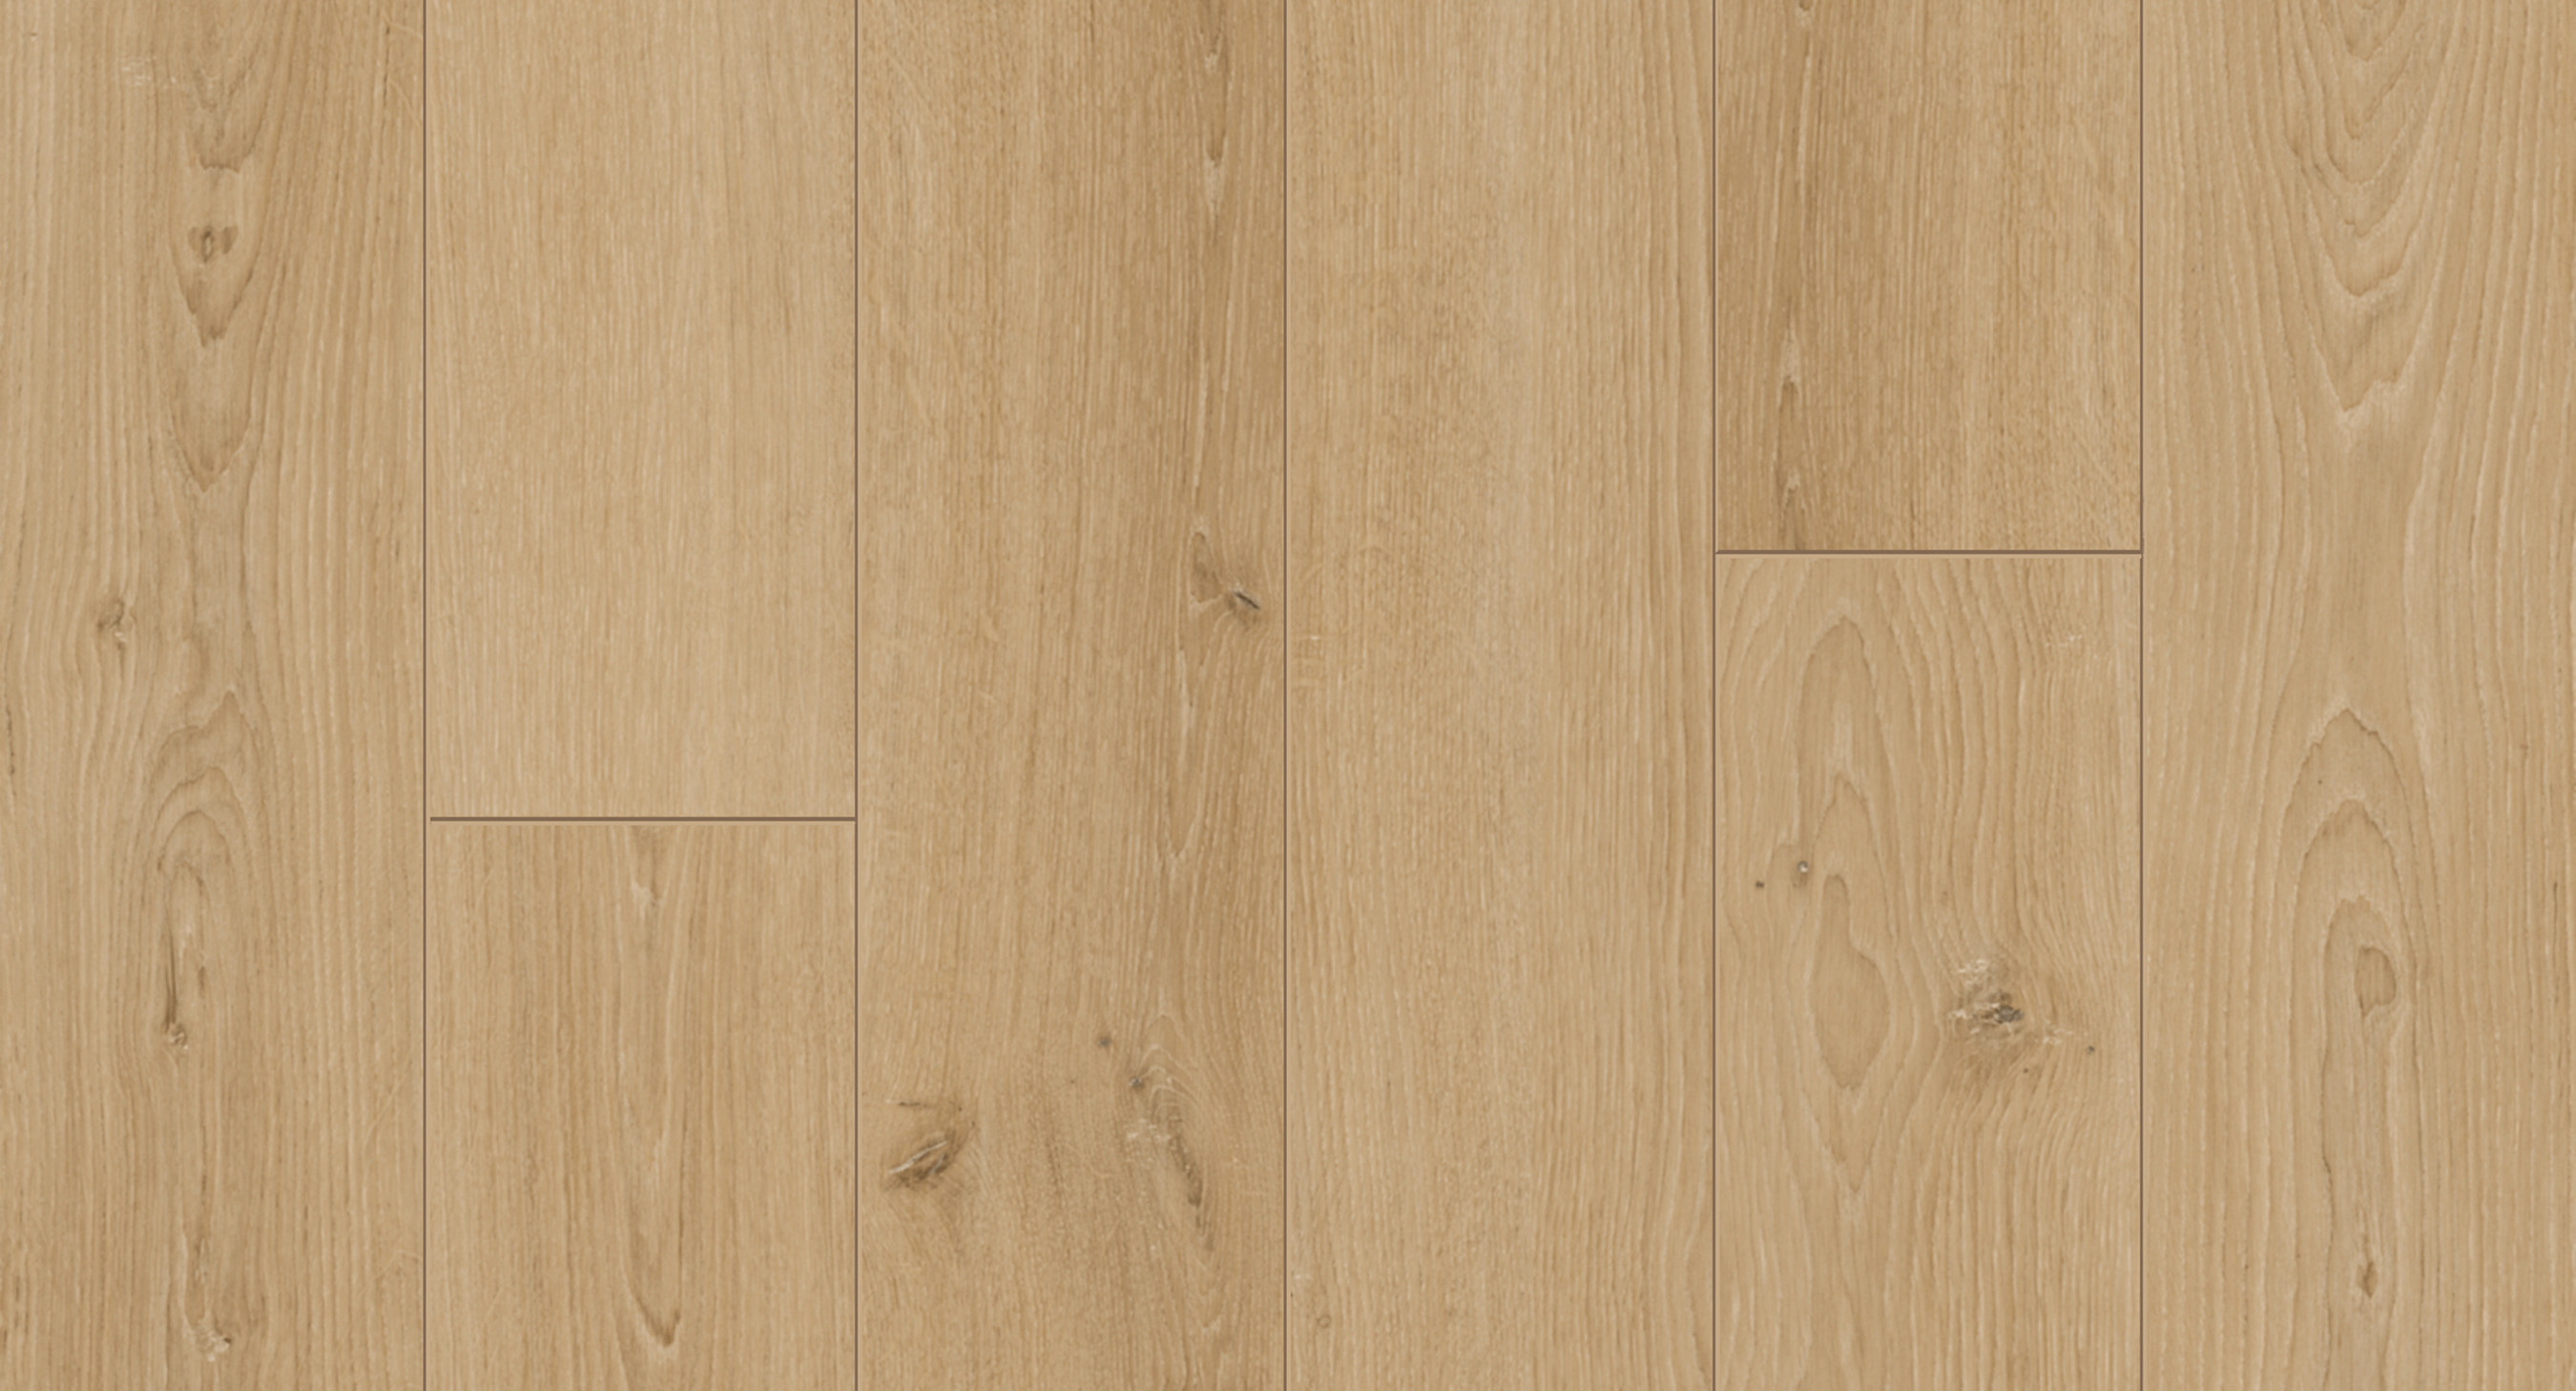 Weight Of Hardwood Flooring Of Classic Laminate Flooring Products Parador Throughout 45a